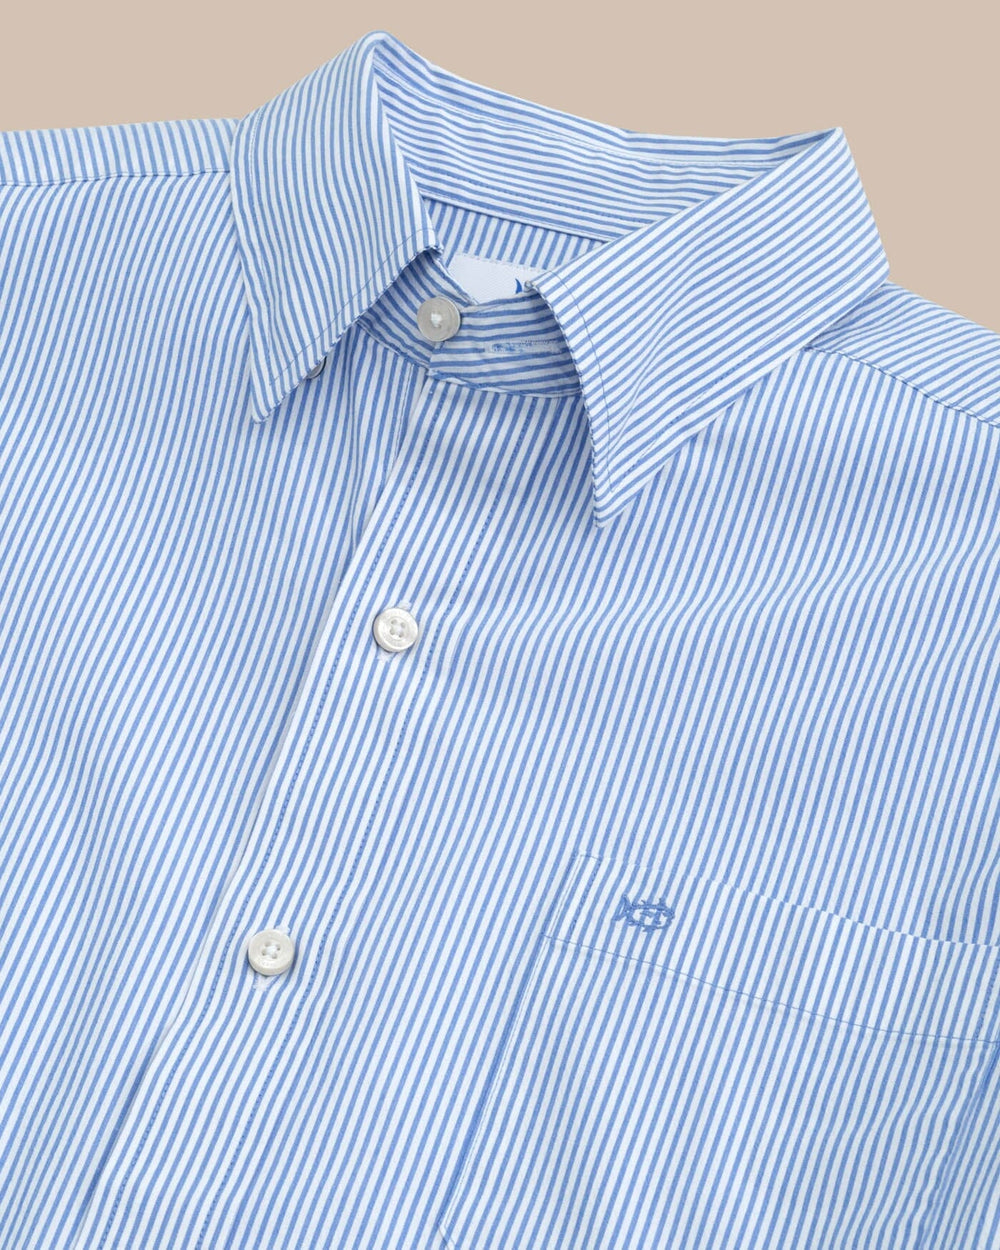 The detail view of the Southern Tide Charleston Granby Stripe Long Sleeve Sport Shirt by Southern Tide - Cobalt Blue